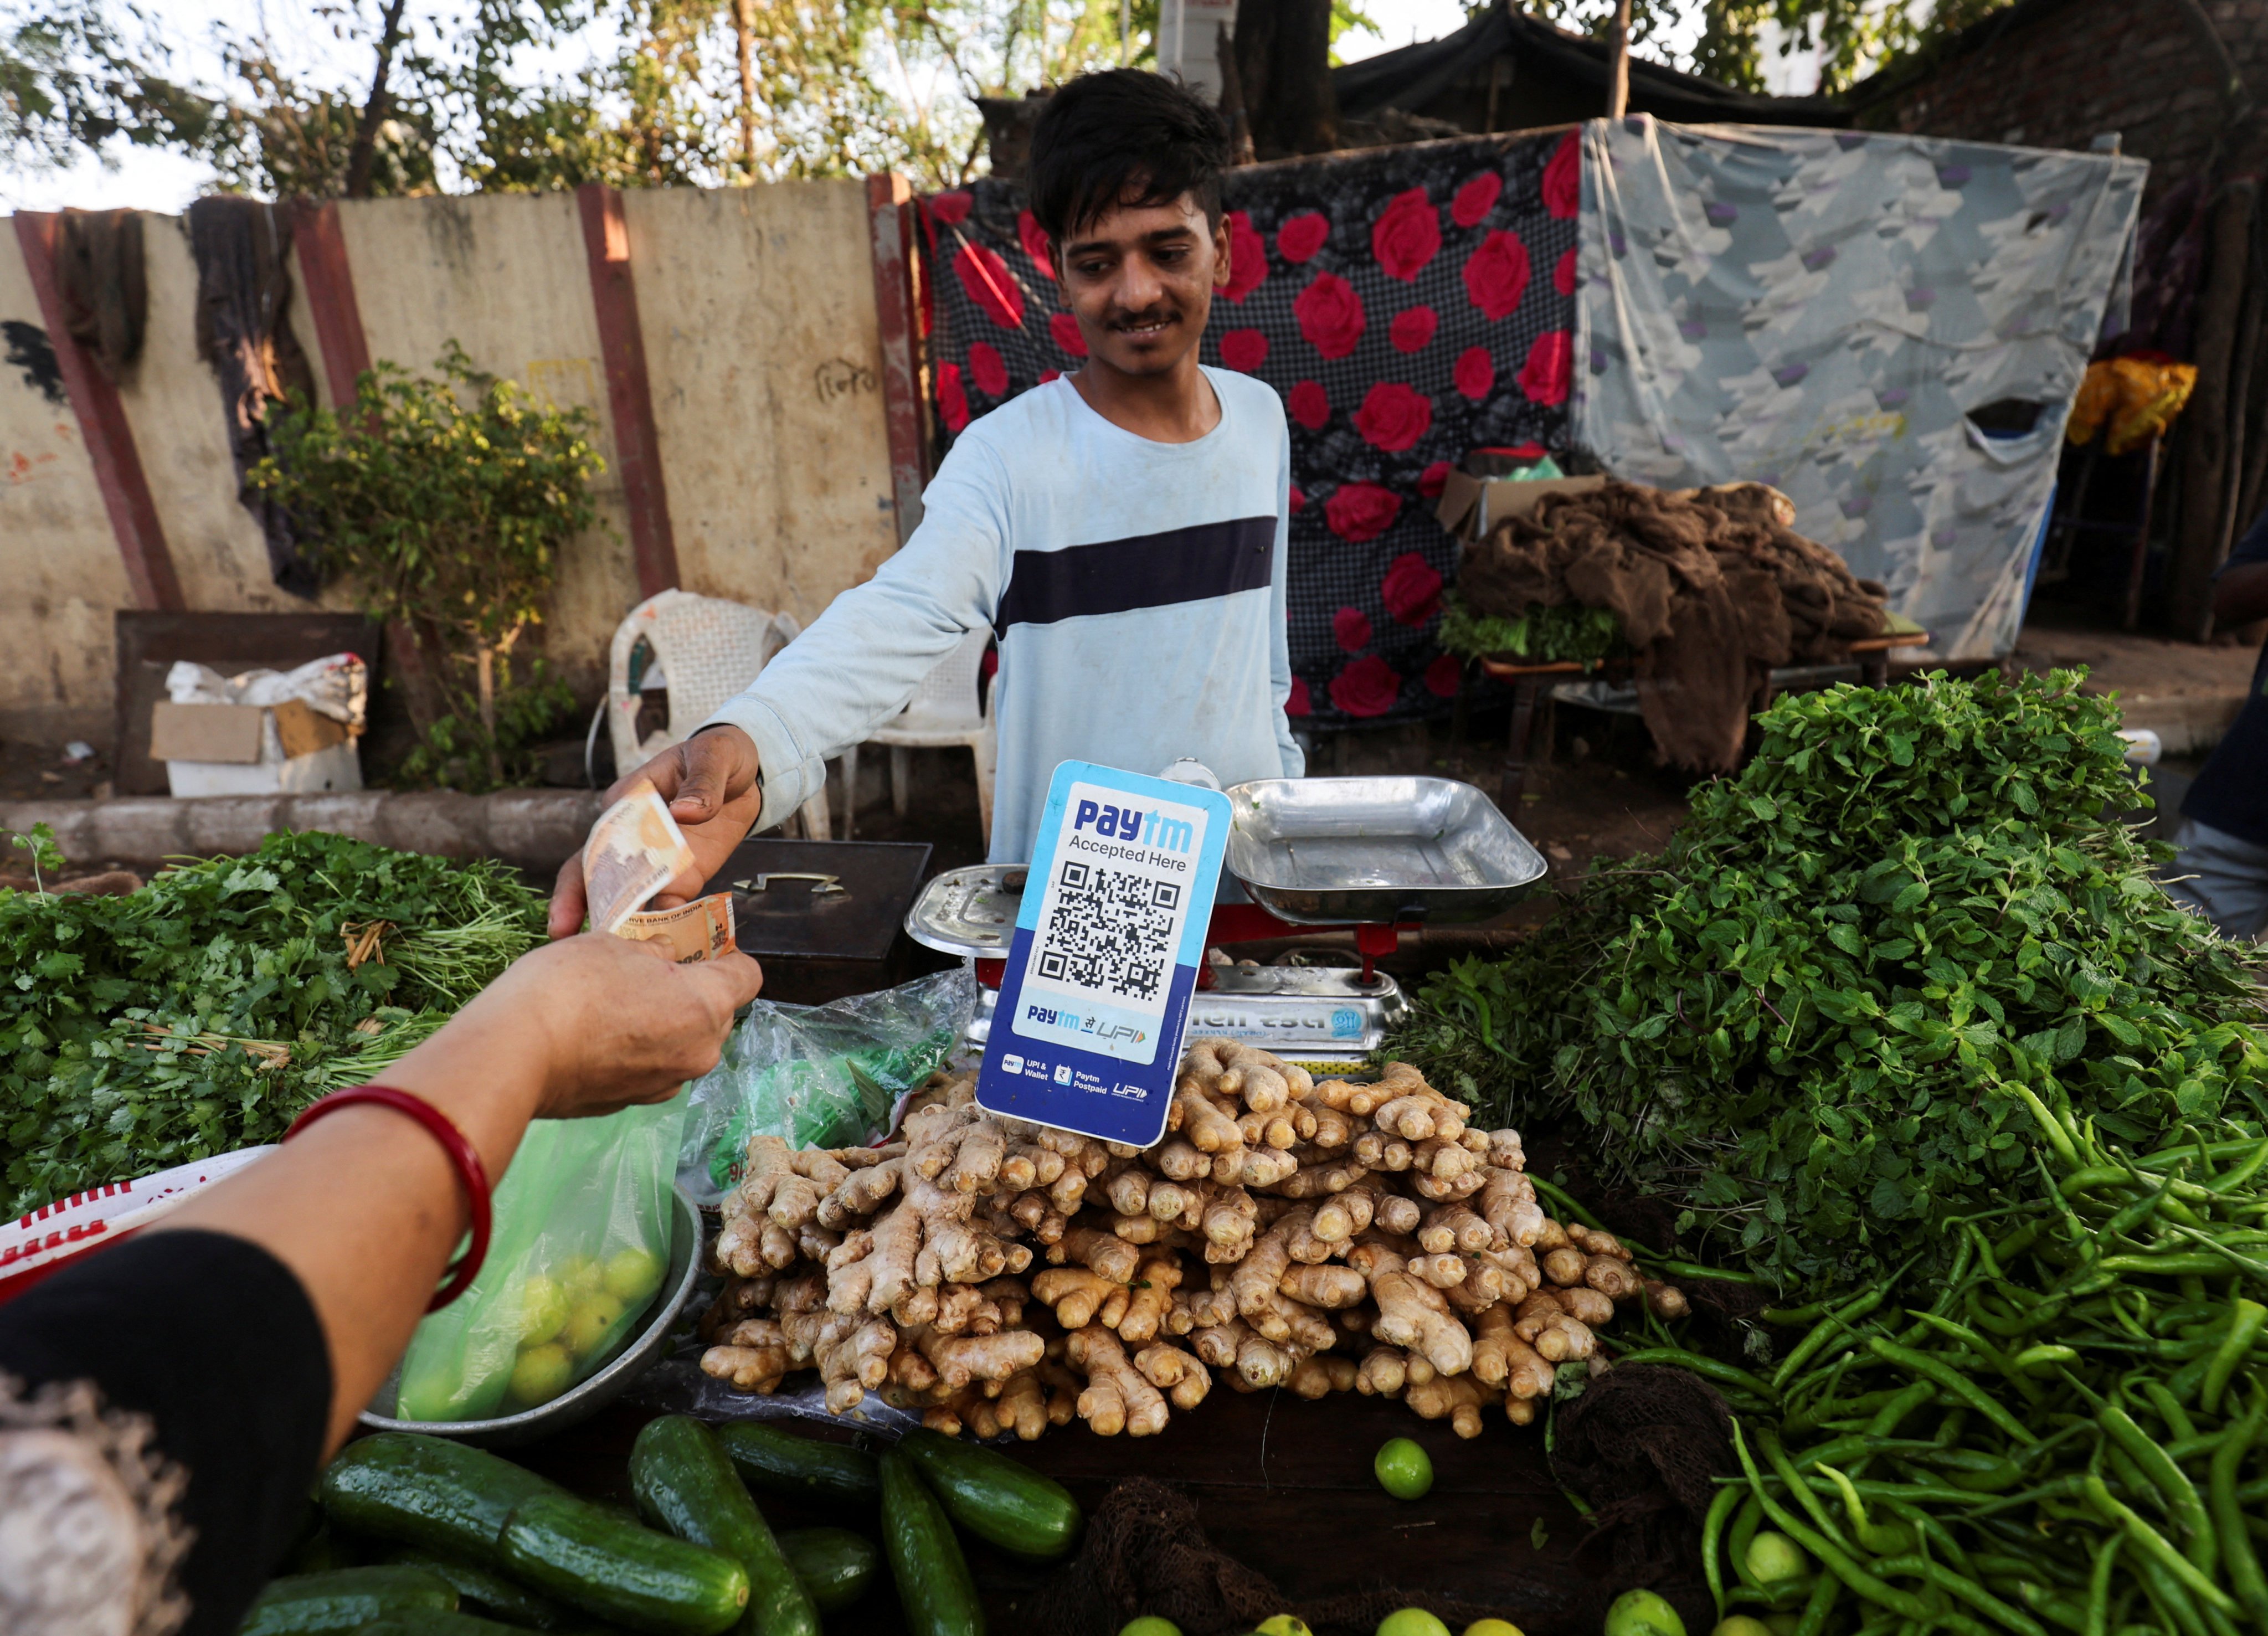 A customer pays cash to buy vegetables next to a QR code of Paytm, a digital payments firm, in Ahmedabad. Analysts anticipate more challenges in India’s tech sector in the coming months. Photo: Reuters